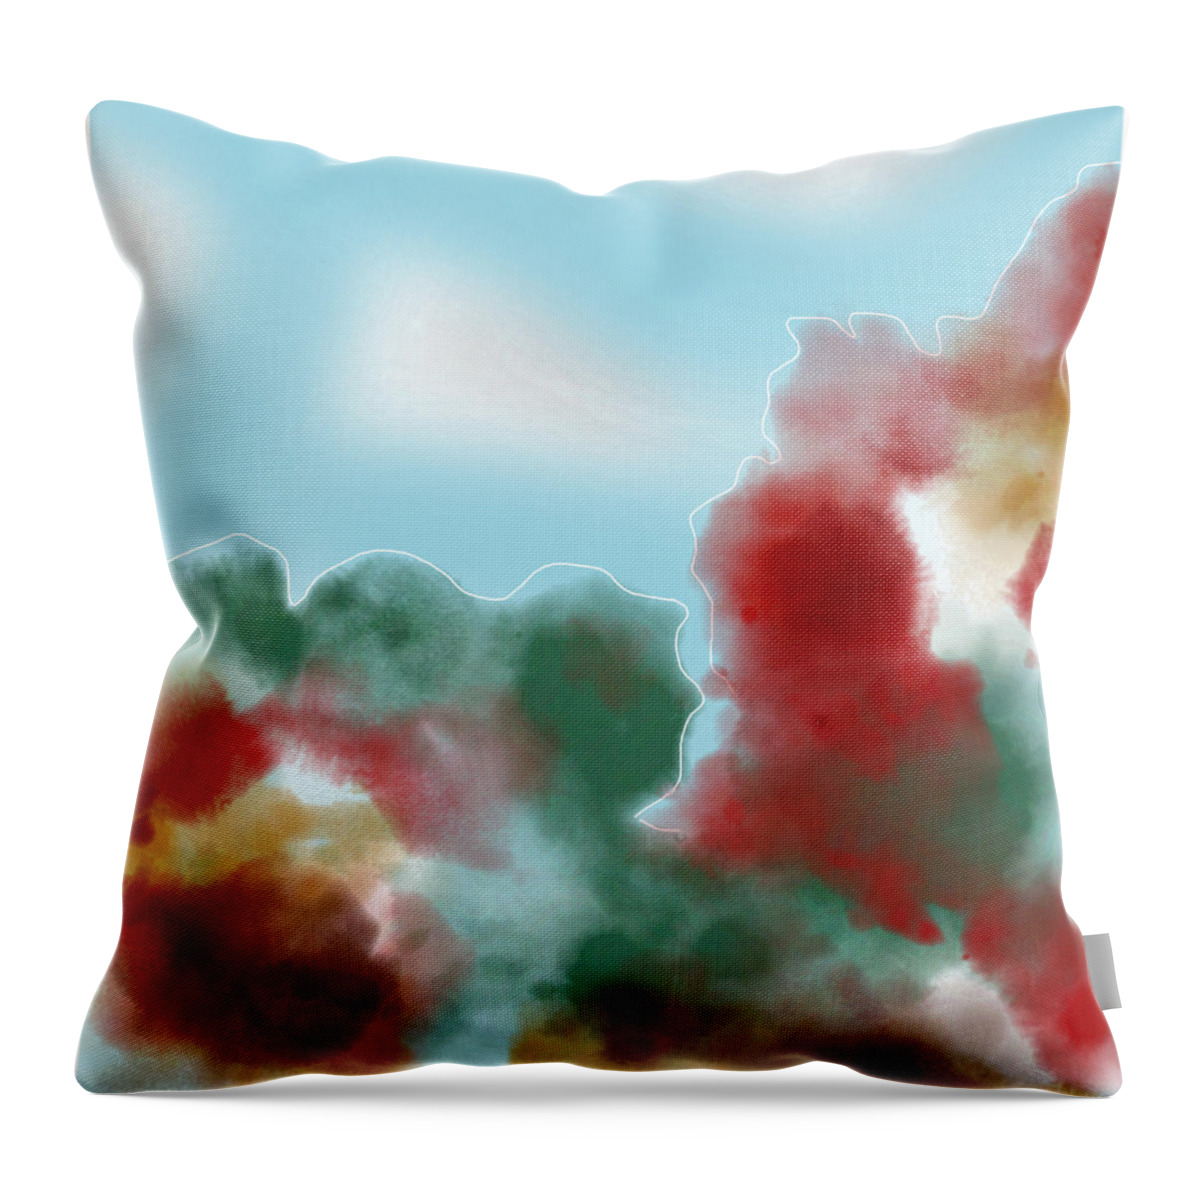 Fall Throw Pillow featuring the digital art Find your peace by Amber Lasche